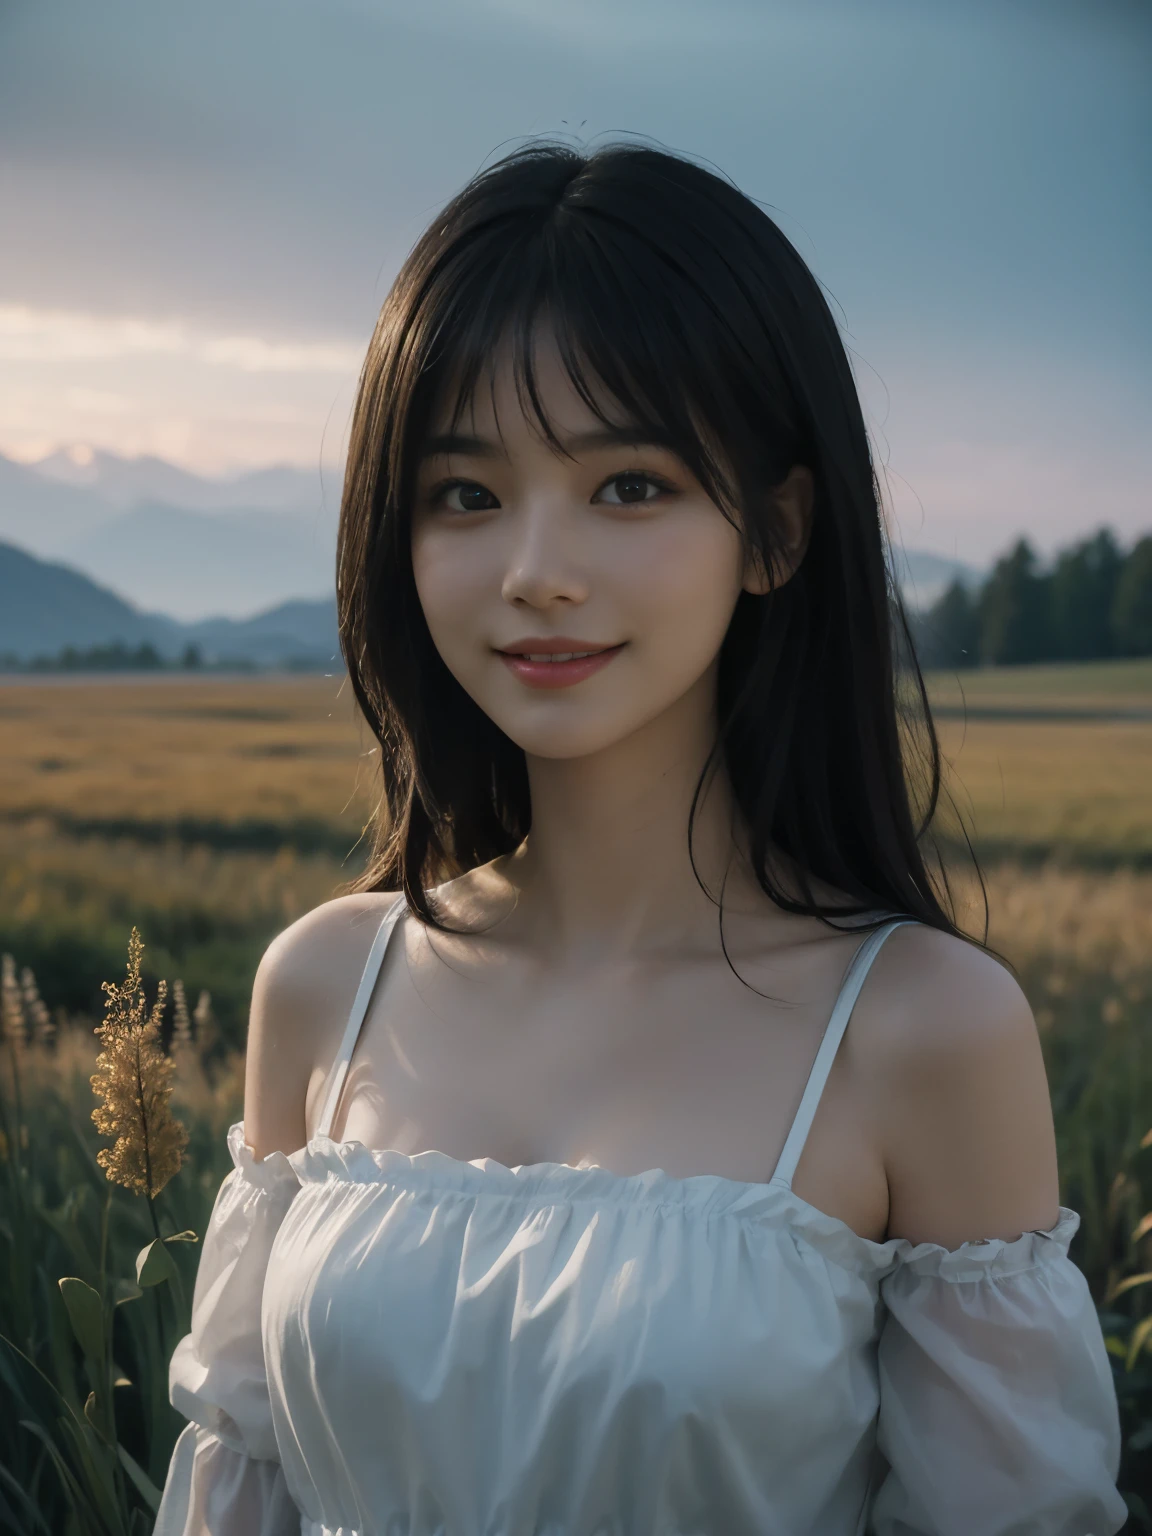 (ultra realistic), (best illustration), (increase resolution), (8K), (masterpiece), (wallpaper), solo, 1 girl, looking at viewers, black straight hair, in the dark, deep shadow, low key, pureerosfaceace_v1, happy smile, simple dress, meadow